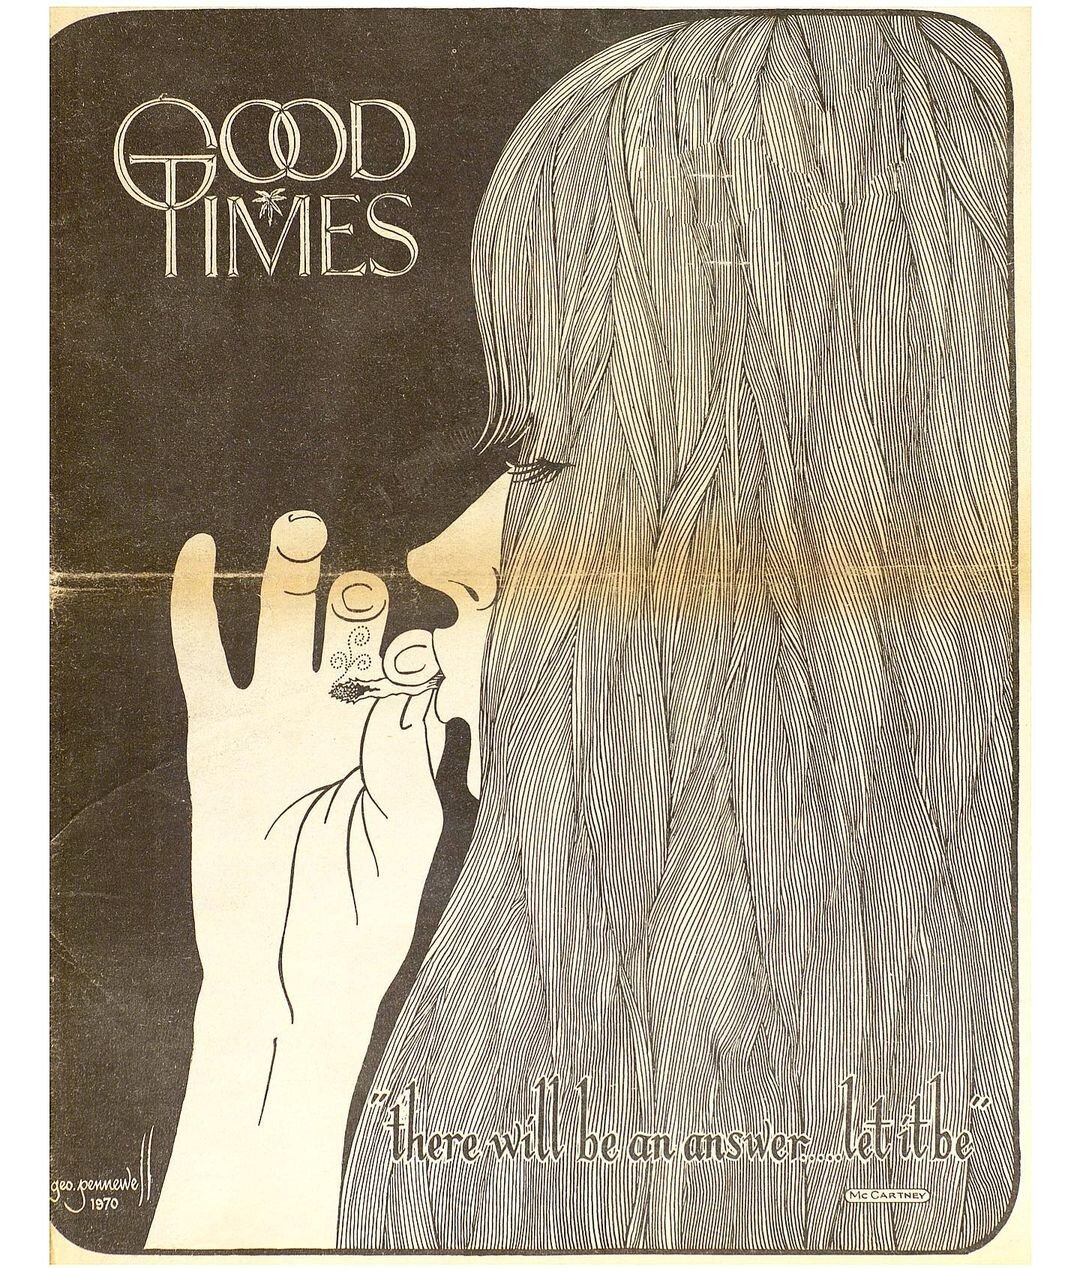 George Pennewell Good Times, 1970